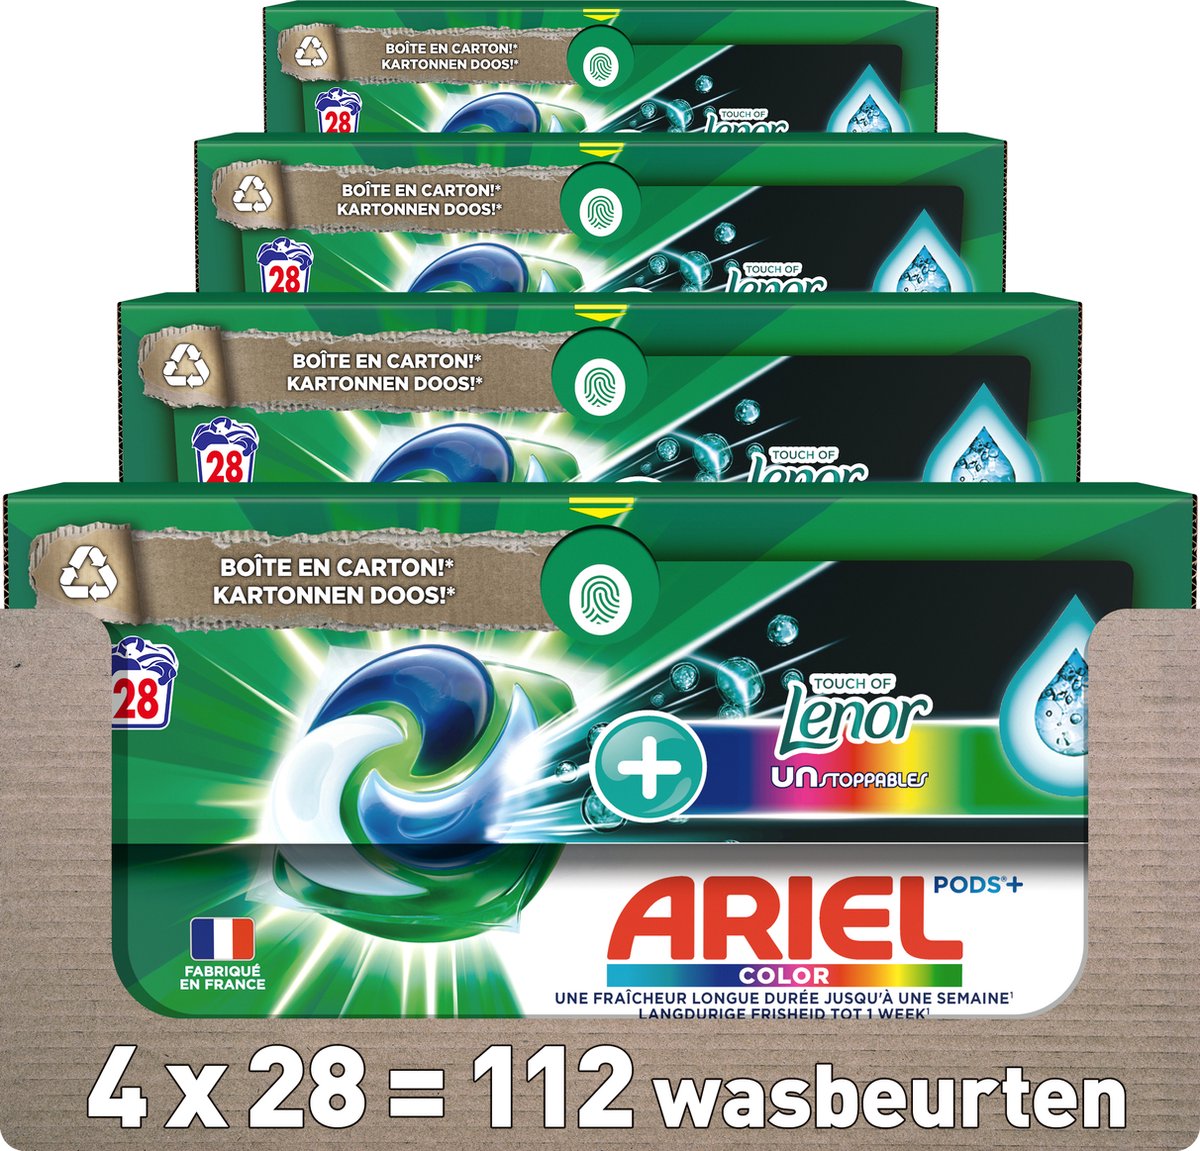 Ariel Pods All-in-1 Touch of Lenor Color Washing Capsules 30pcs